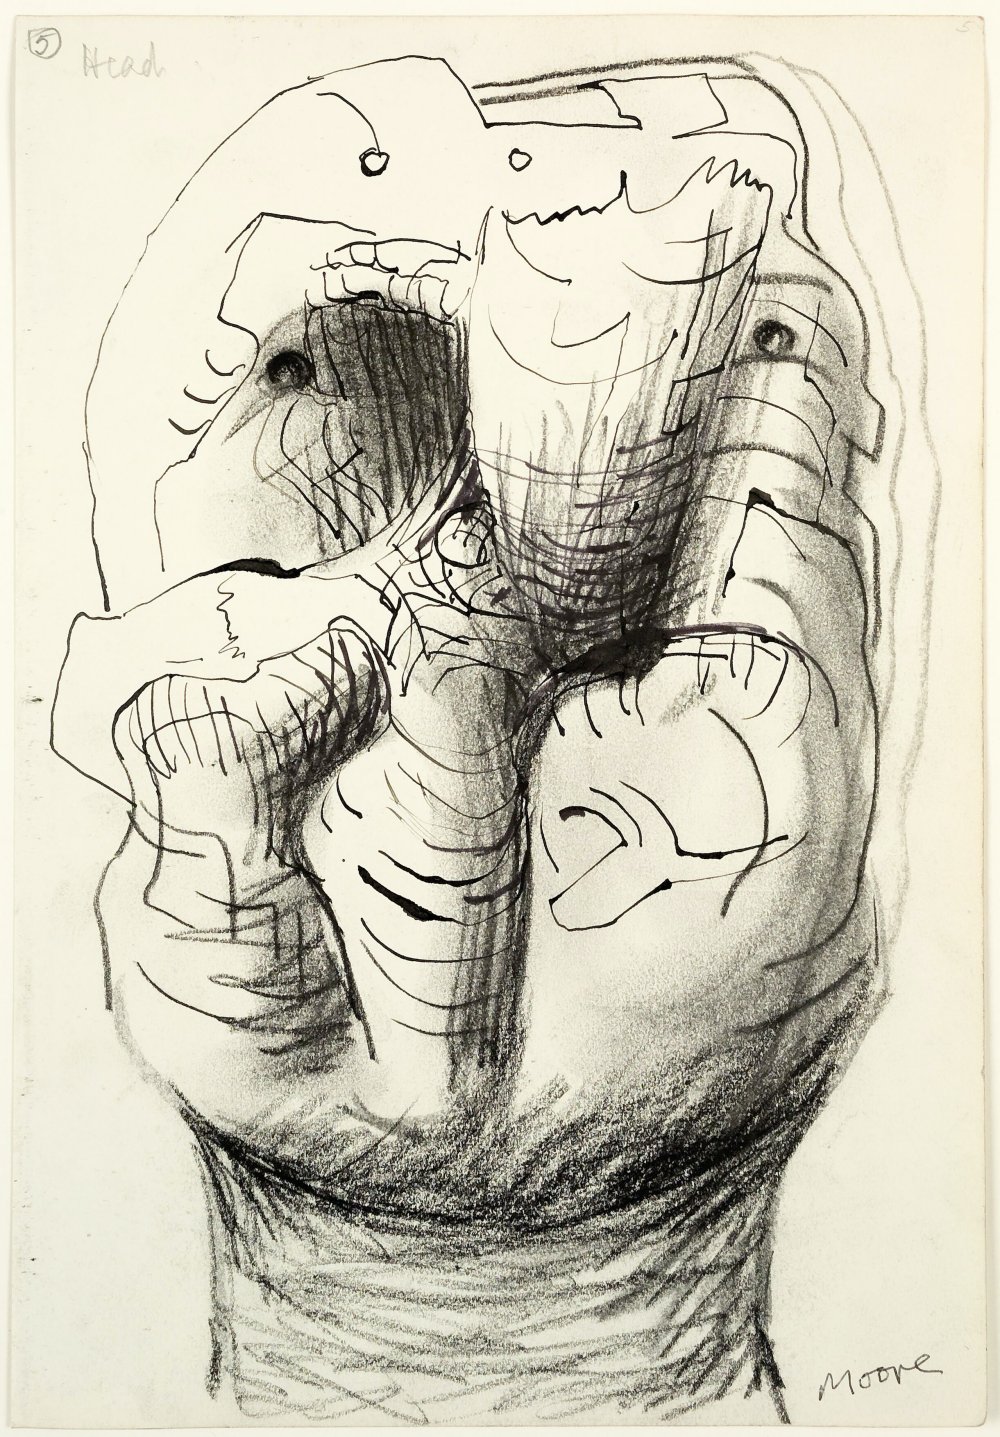 Henry Moore, Idea for Sculpture: Head, 1969, 1977